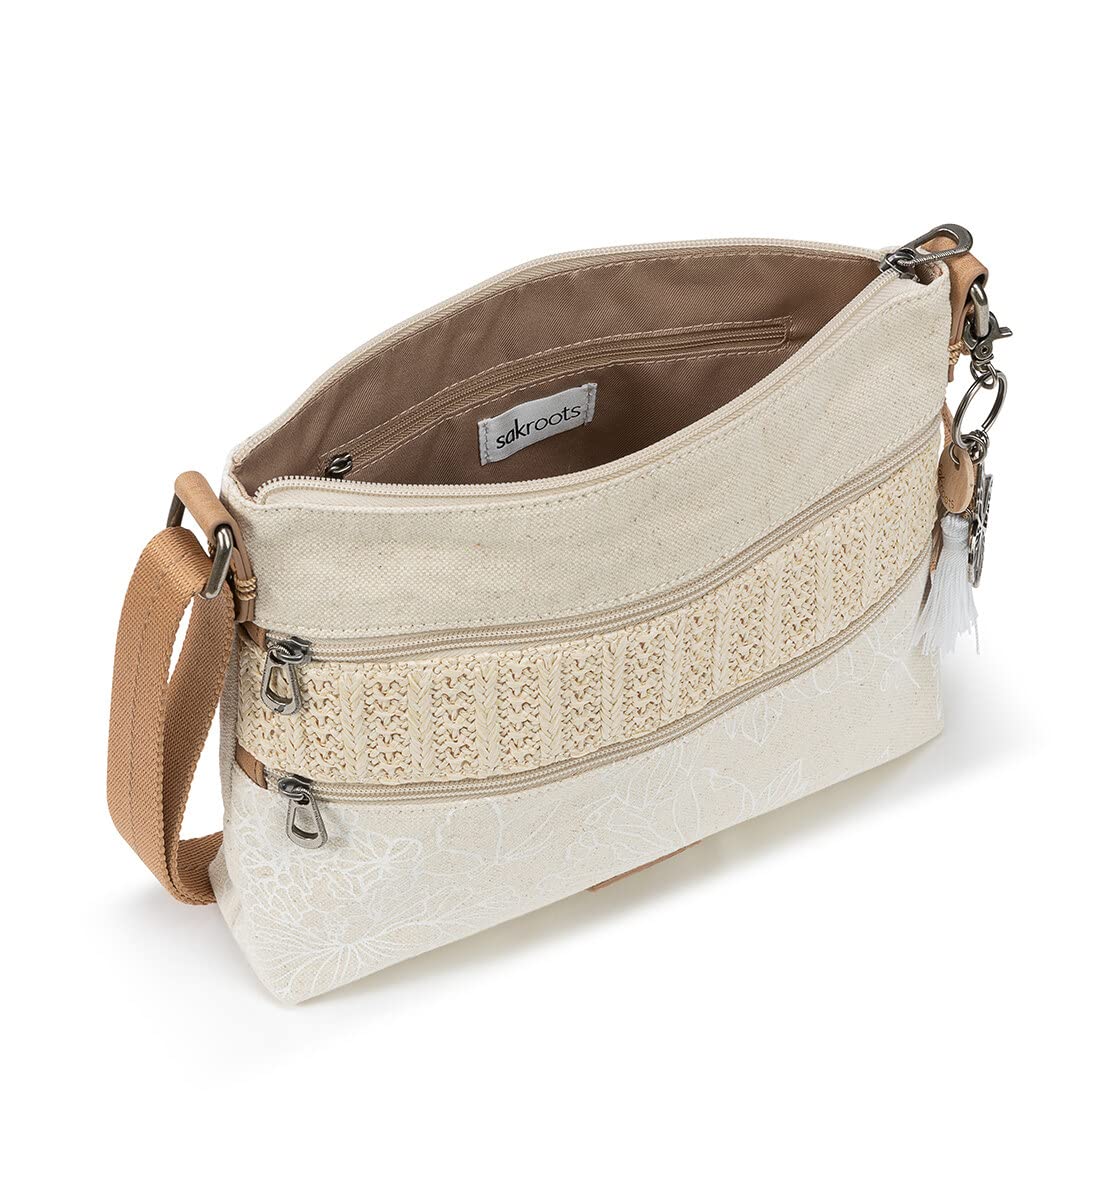 Sakroots Artist Circle Crossbody Bag in Coated Canvas, Multifunctional Purse with Adjustable Strap & Zipper Pockets